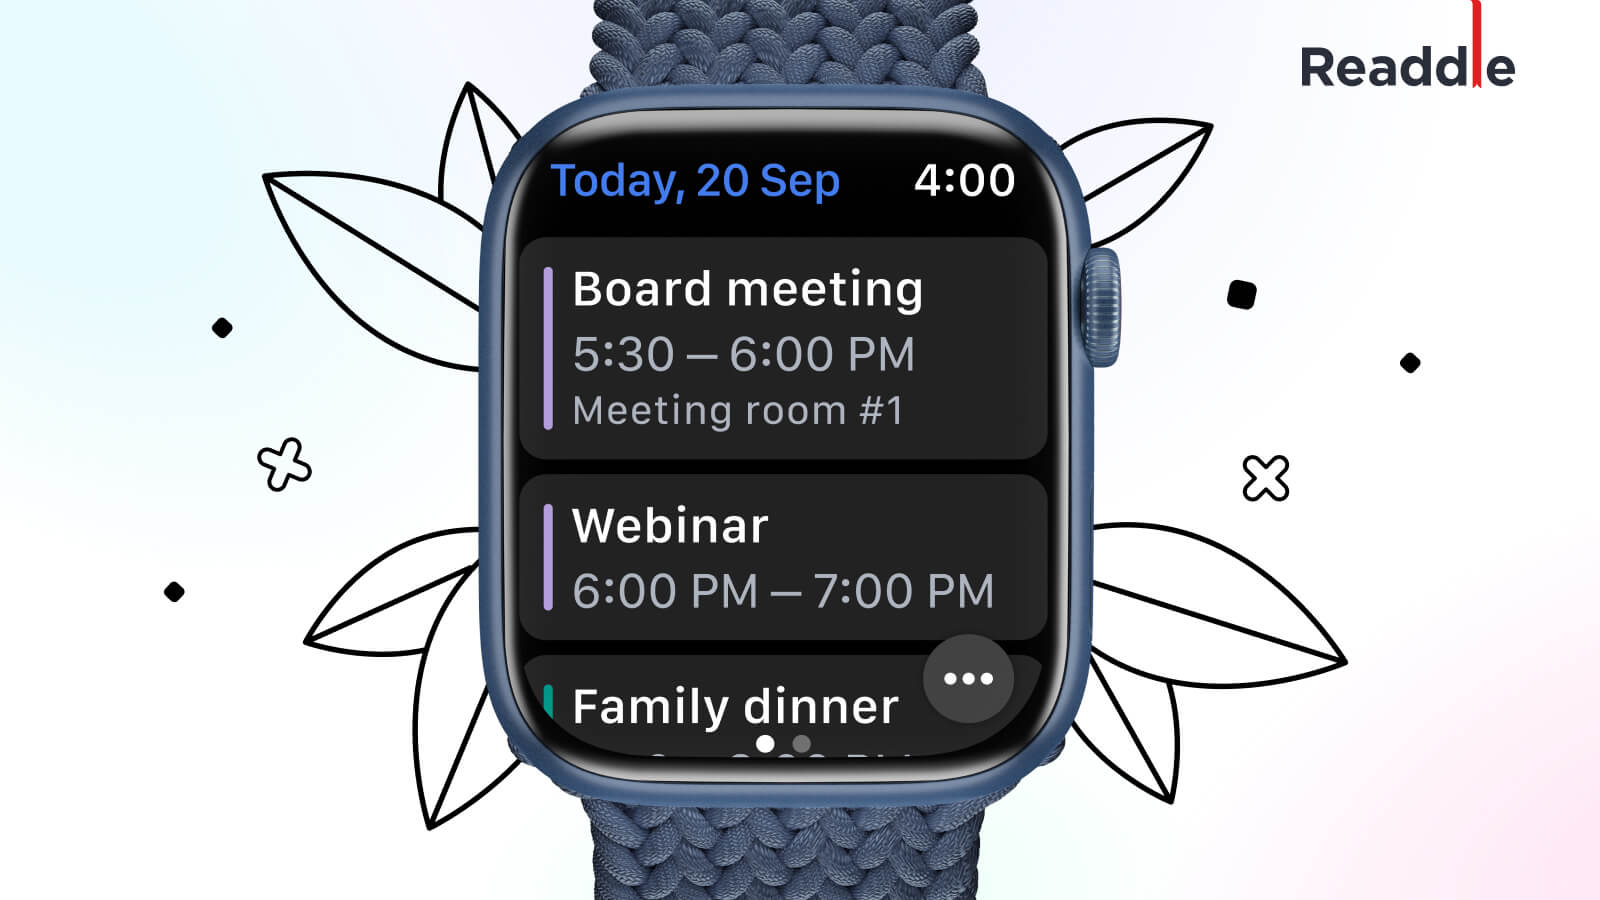 Readdle launches overhauled Calendars app for Apple Watch with new UI